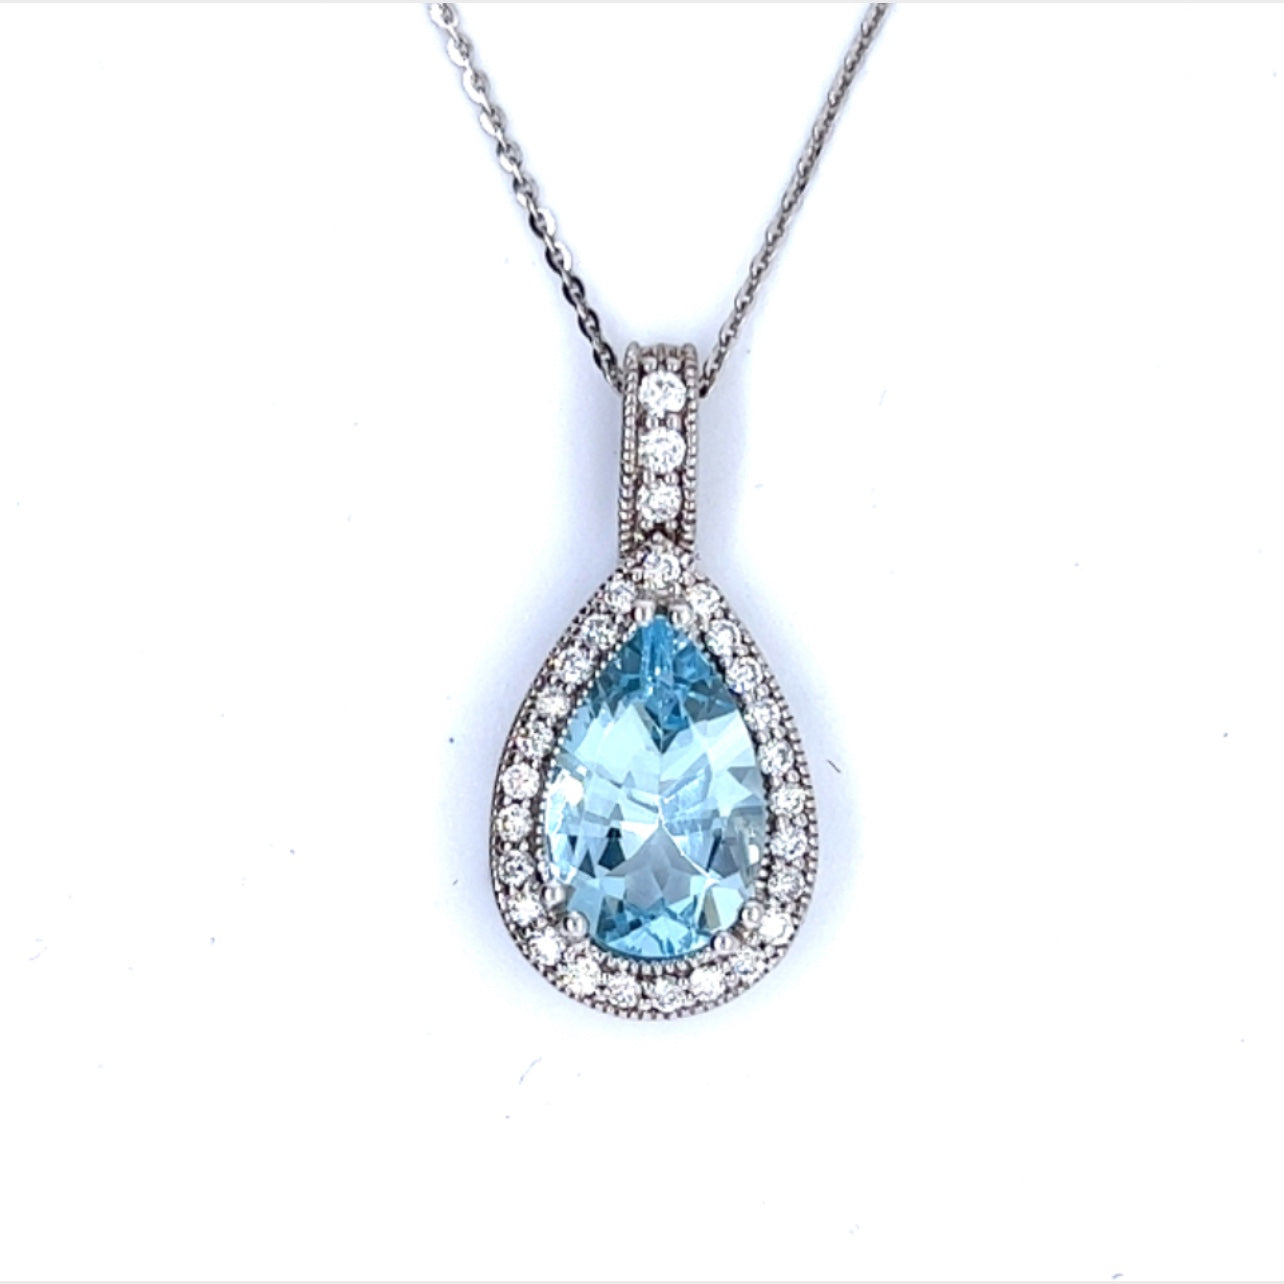 Natural Aquamarine Diamond Pendant With Chain 18" 14k W Gold 4.19 TCW Certified $5,950 213254